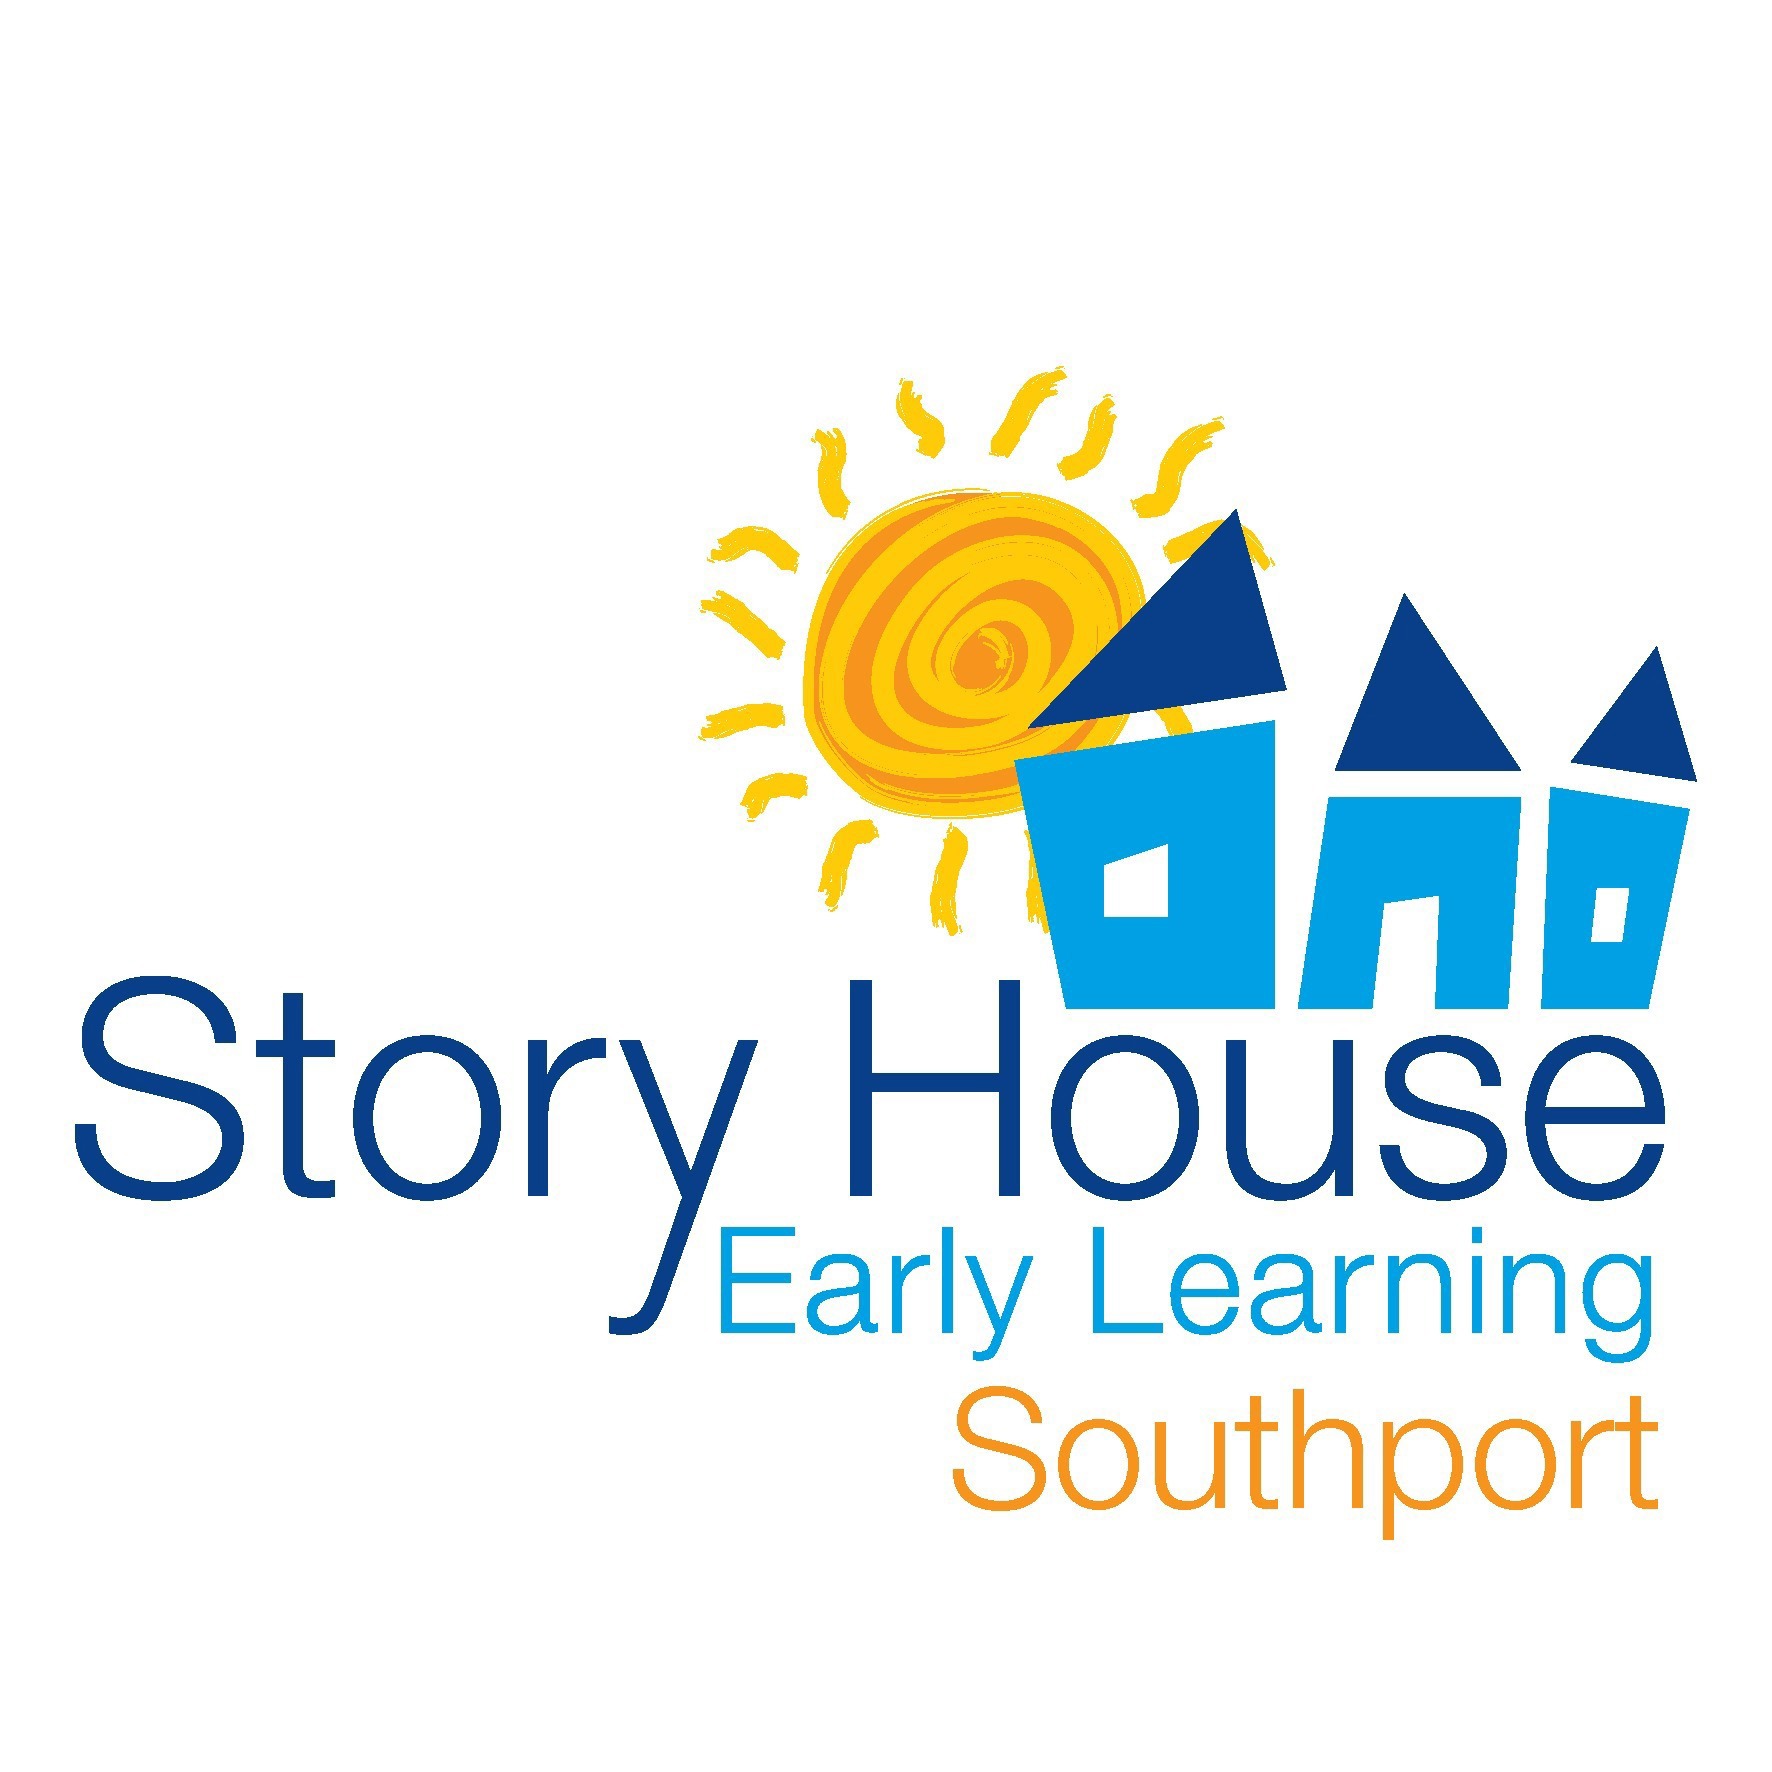 Story House Early Learning Southport